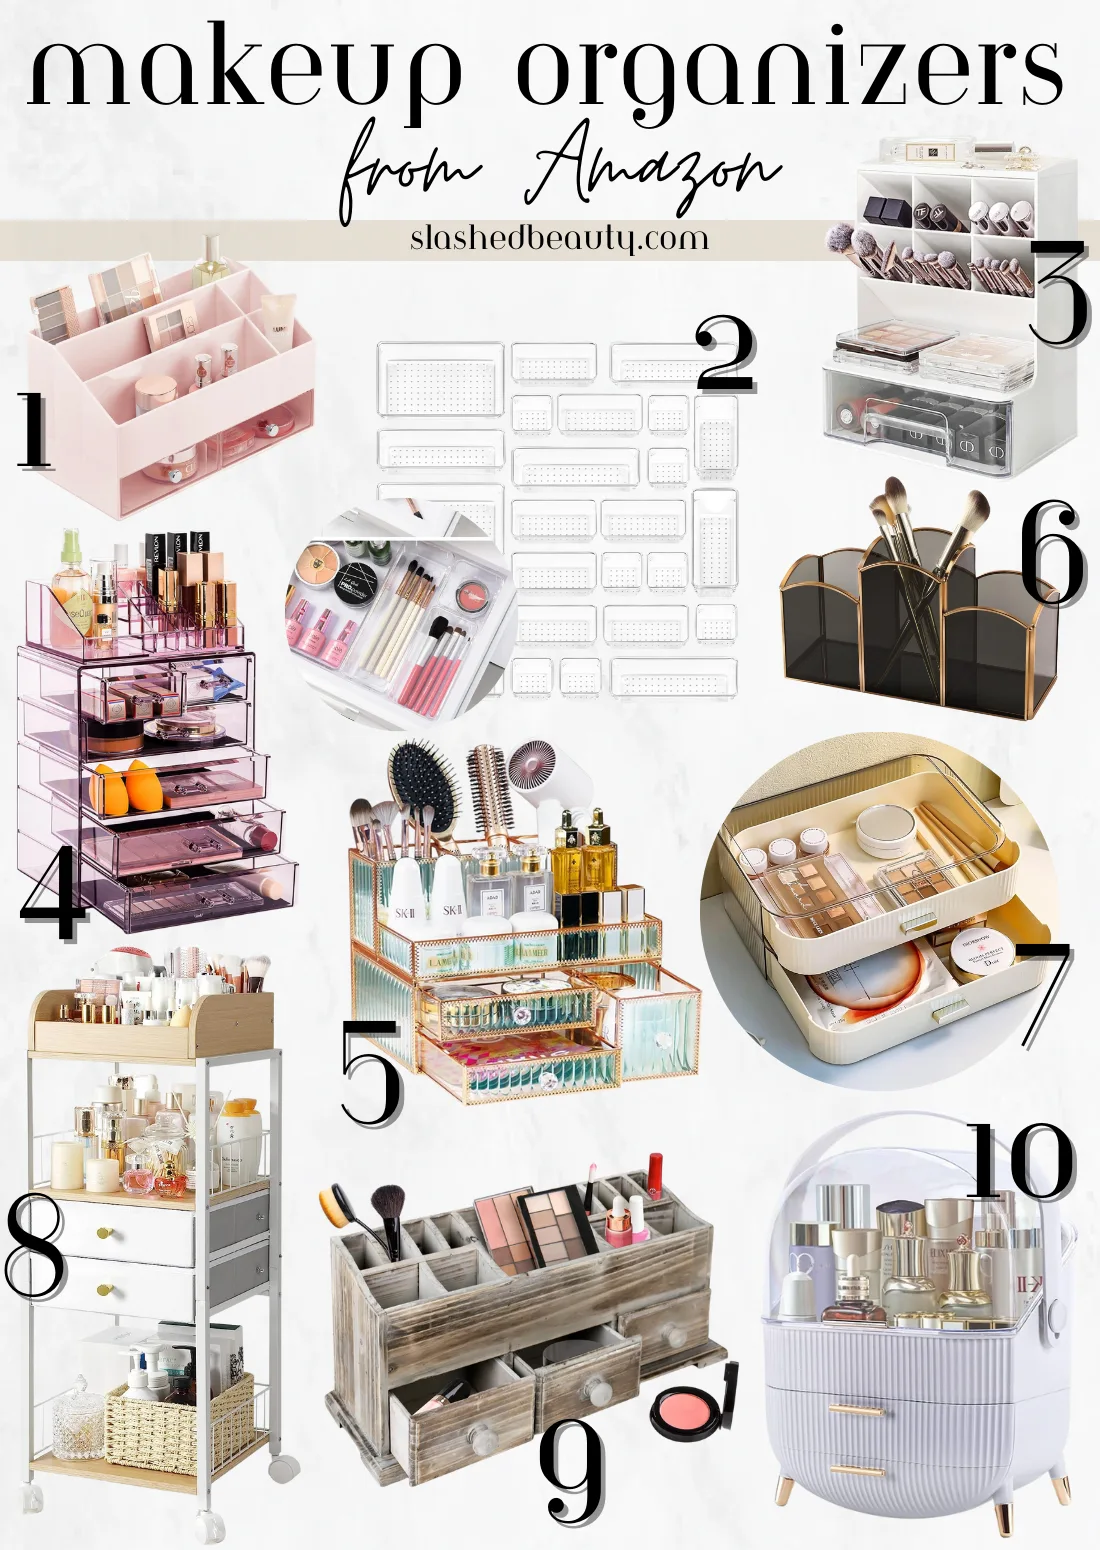 Collage of 10 cute makeup organizers from Amazon